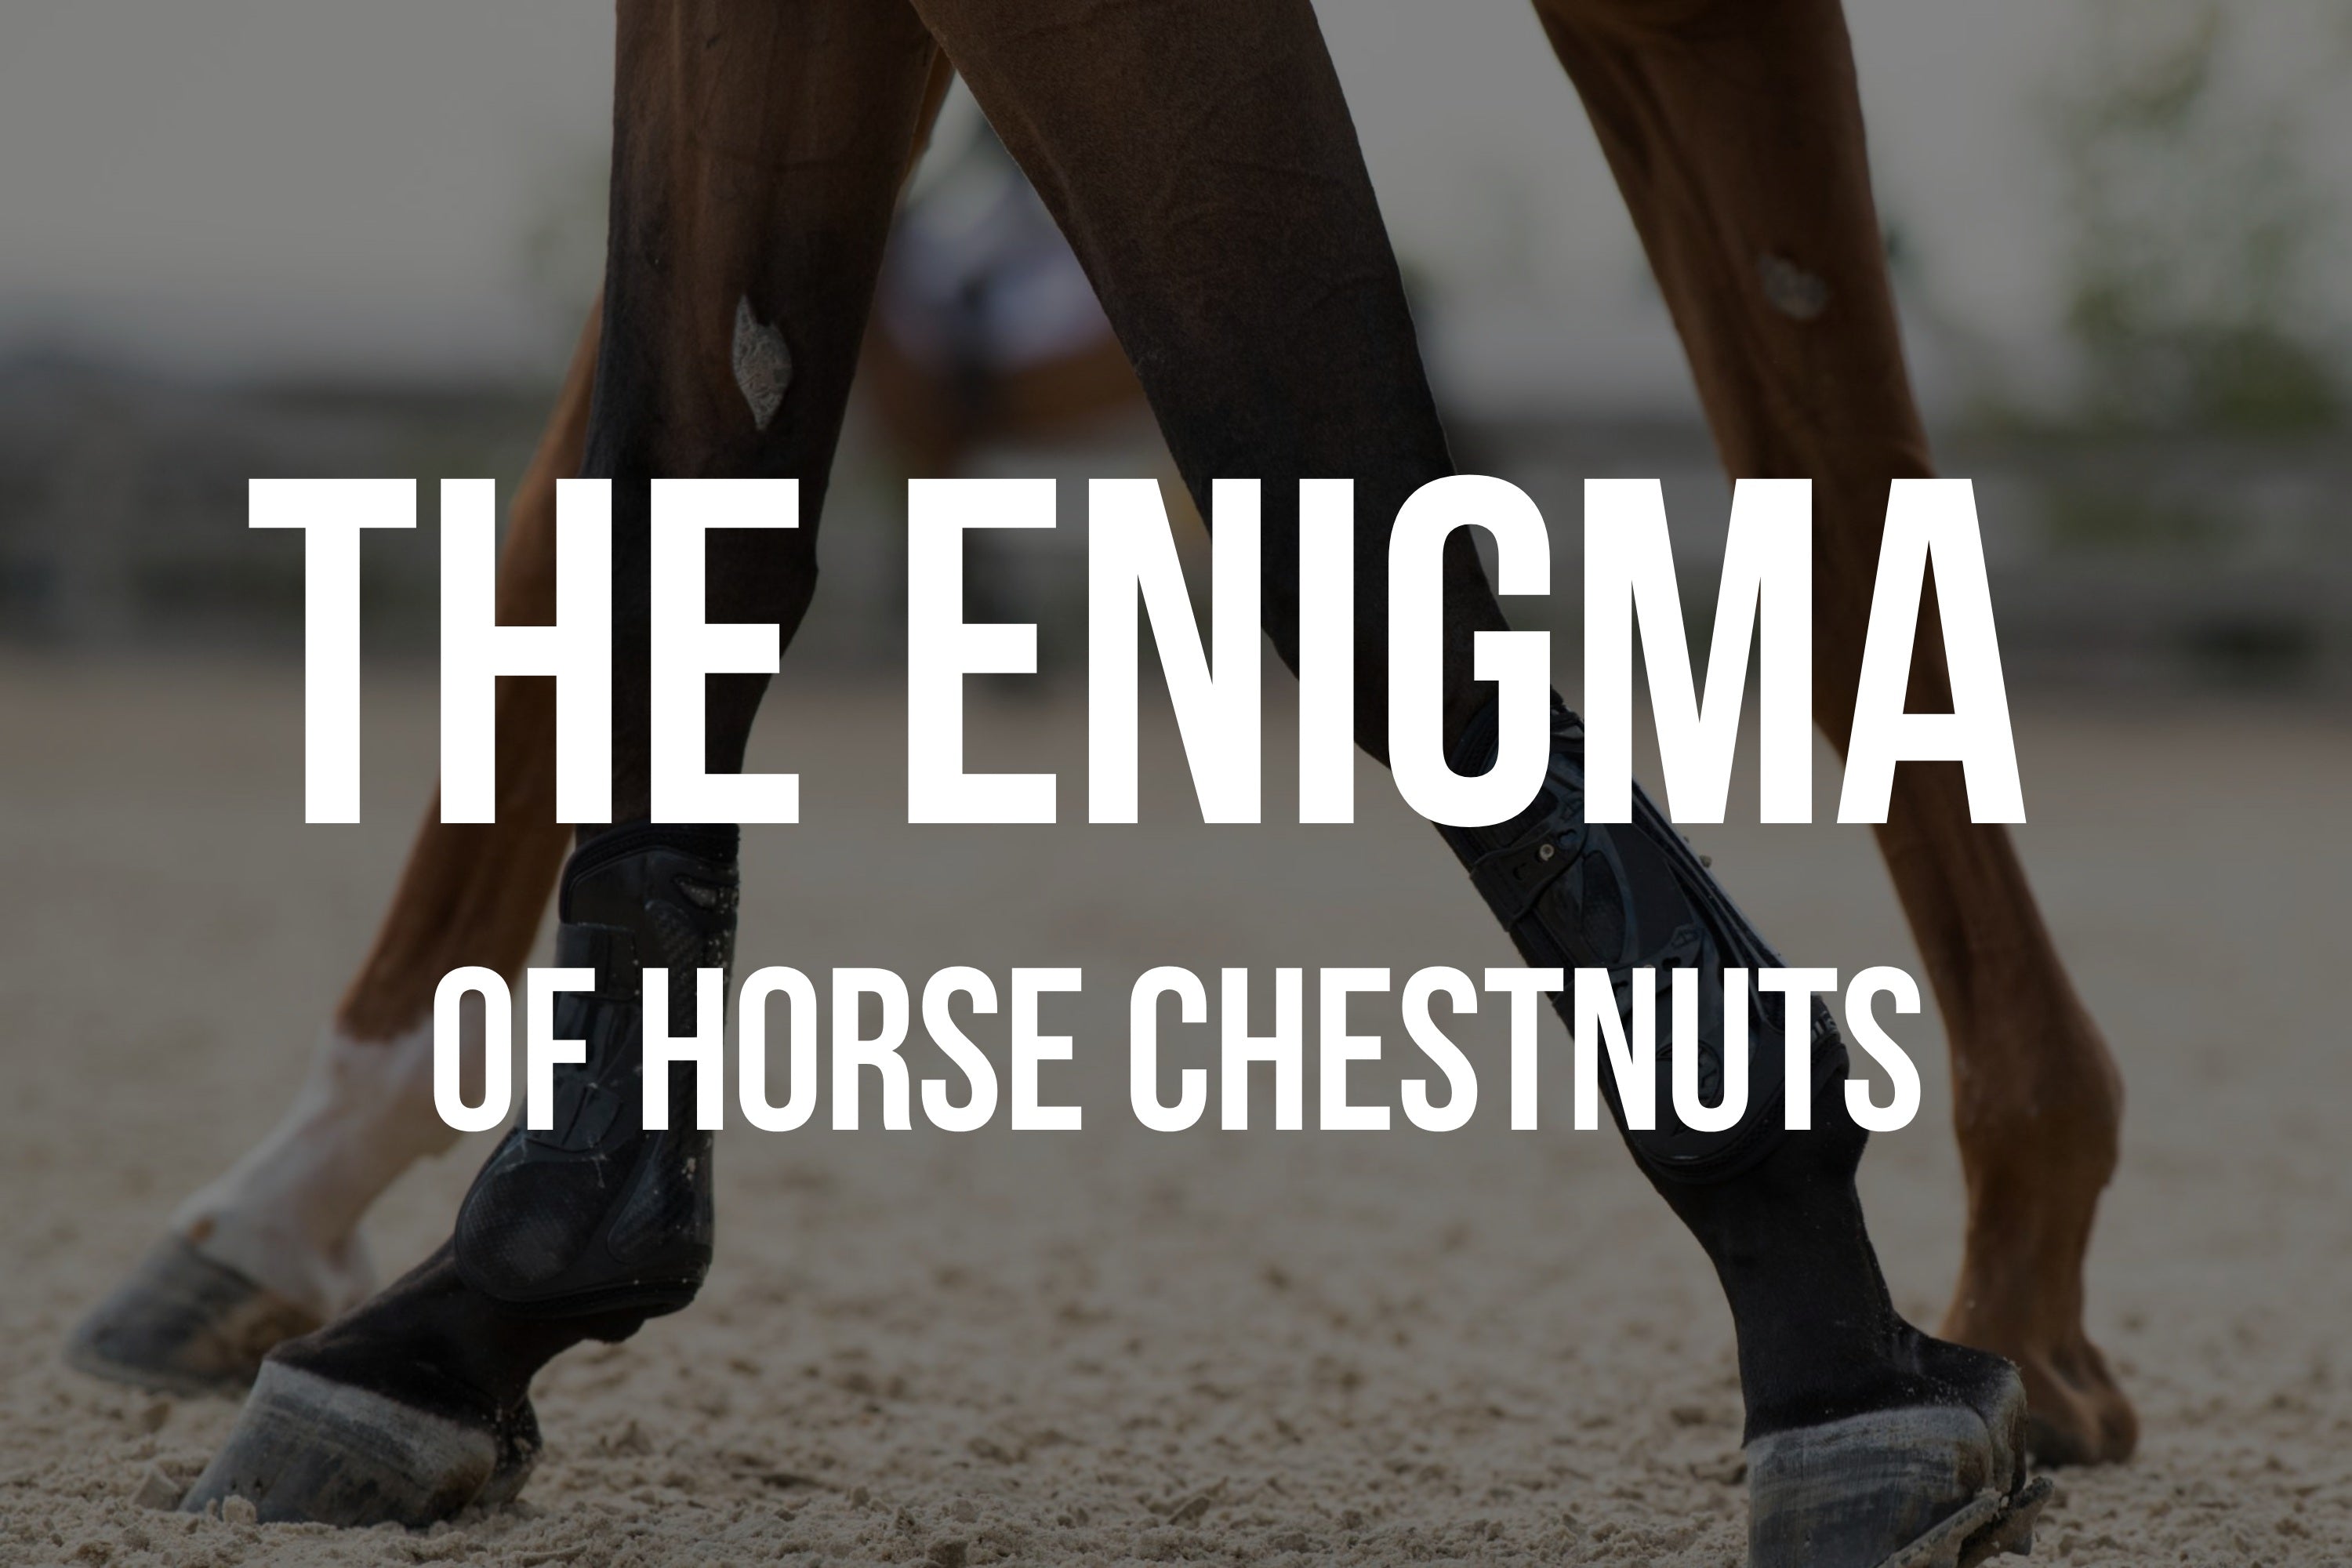 What is a chestnut on a horse